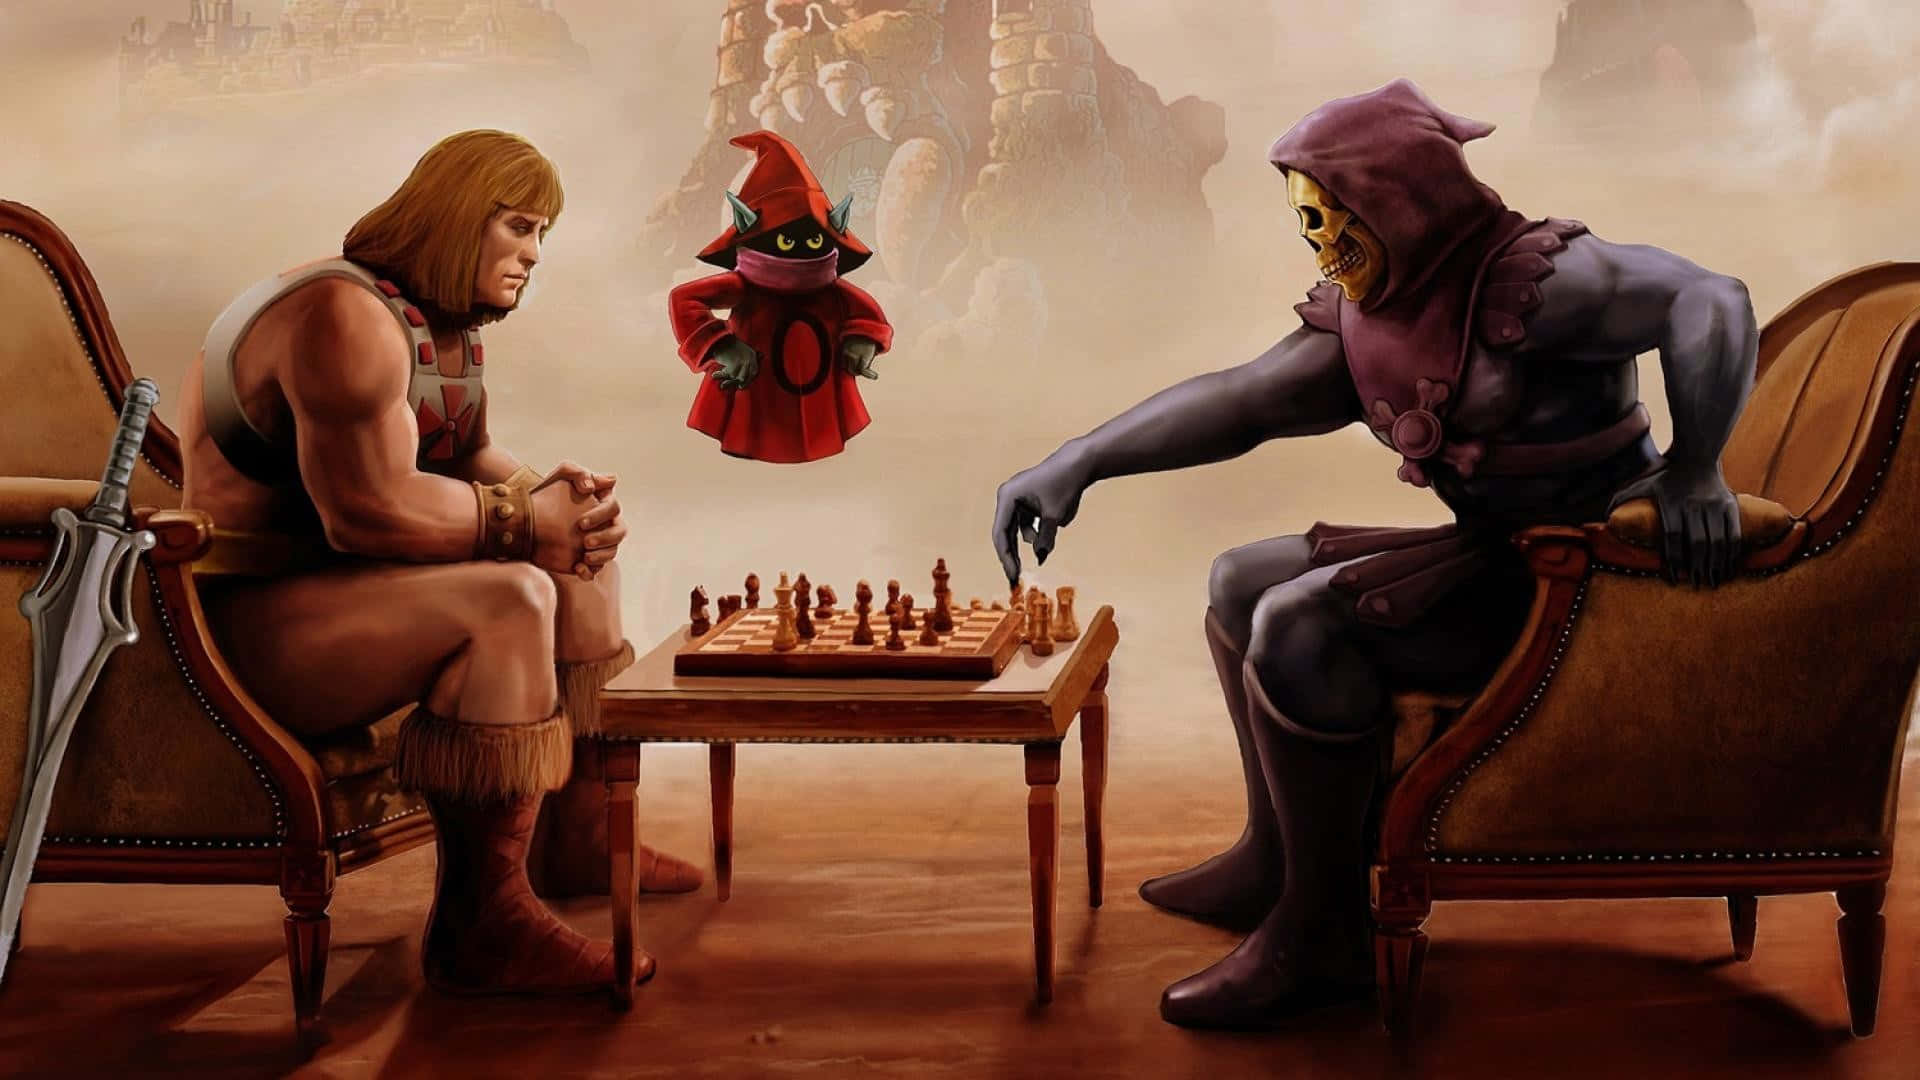 A Man And Woman Are Playing Chess In A Chair